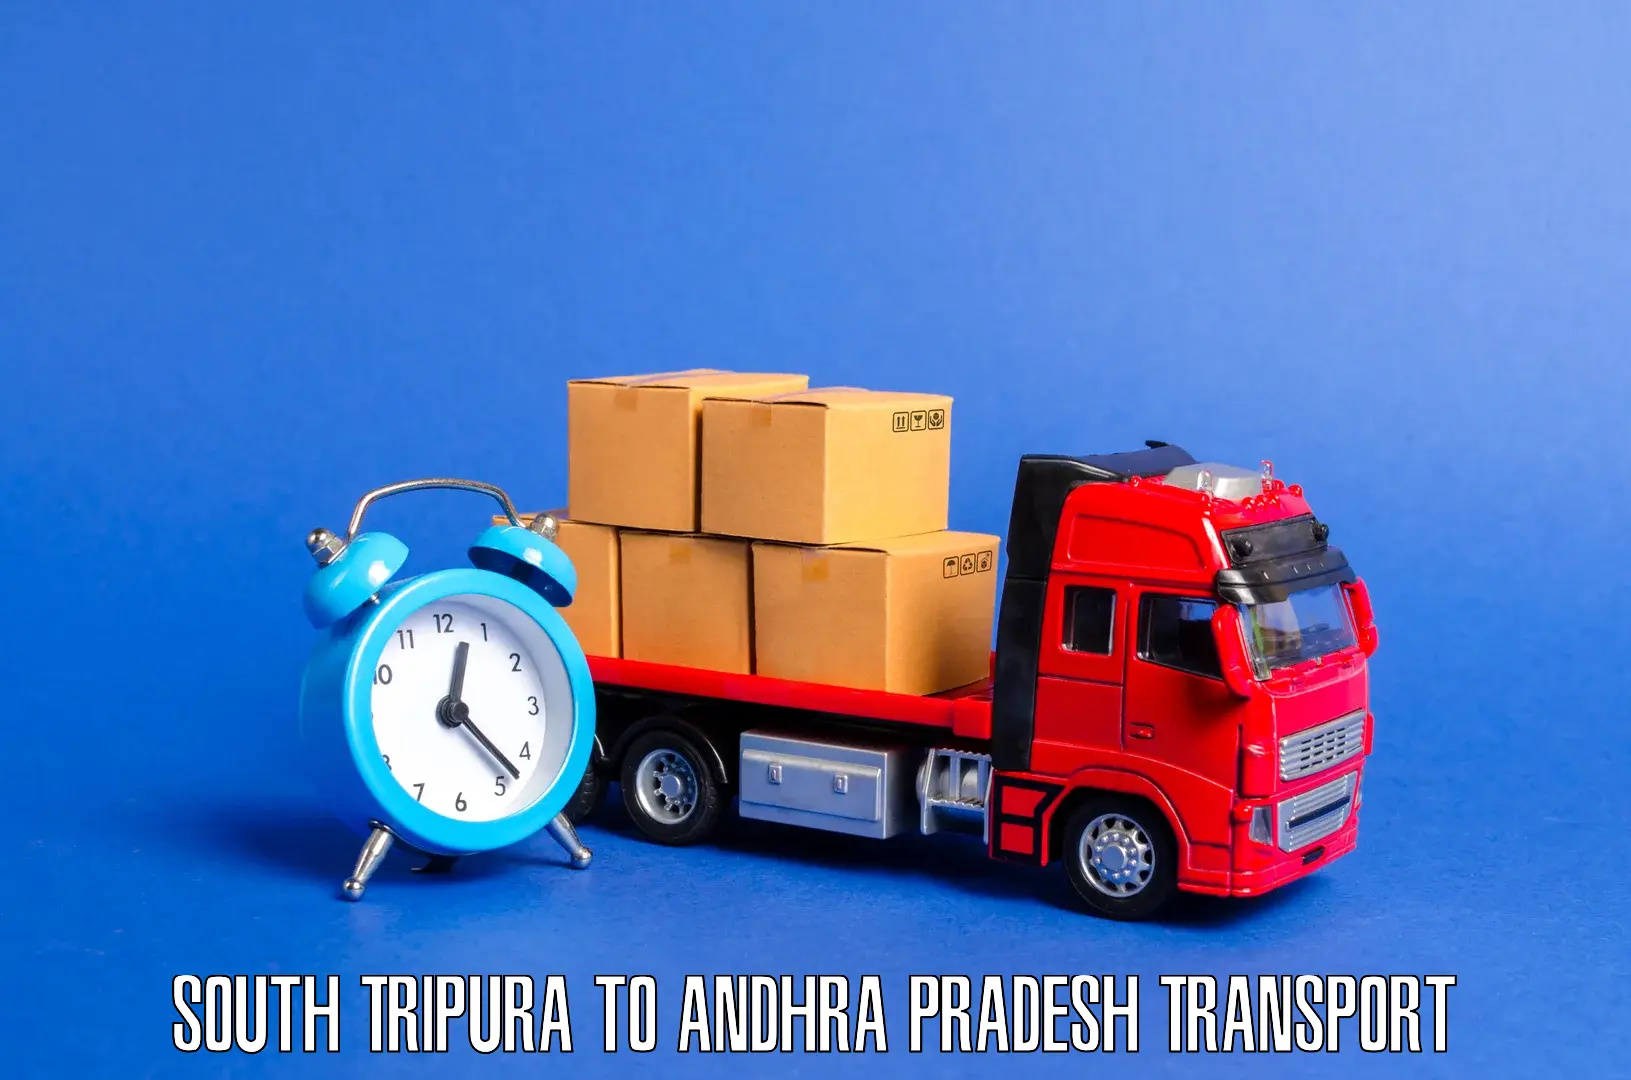 Delivery service South Tripura to Bhattiprolu